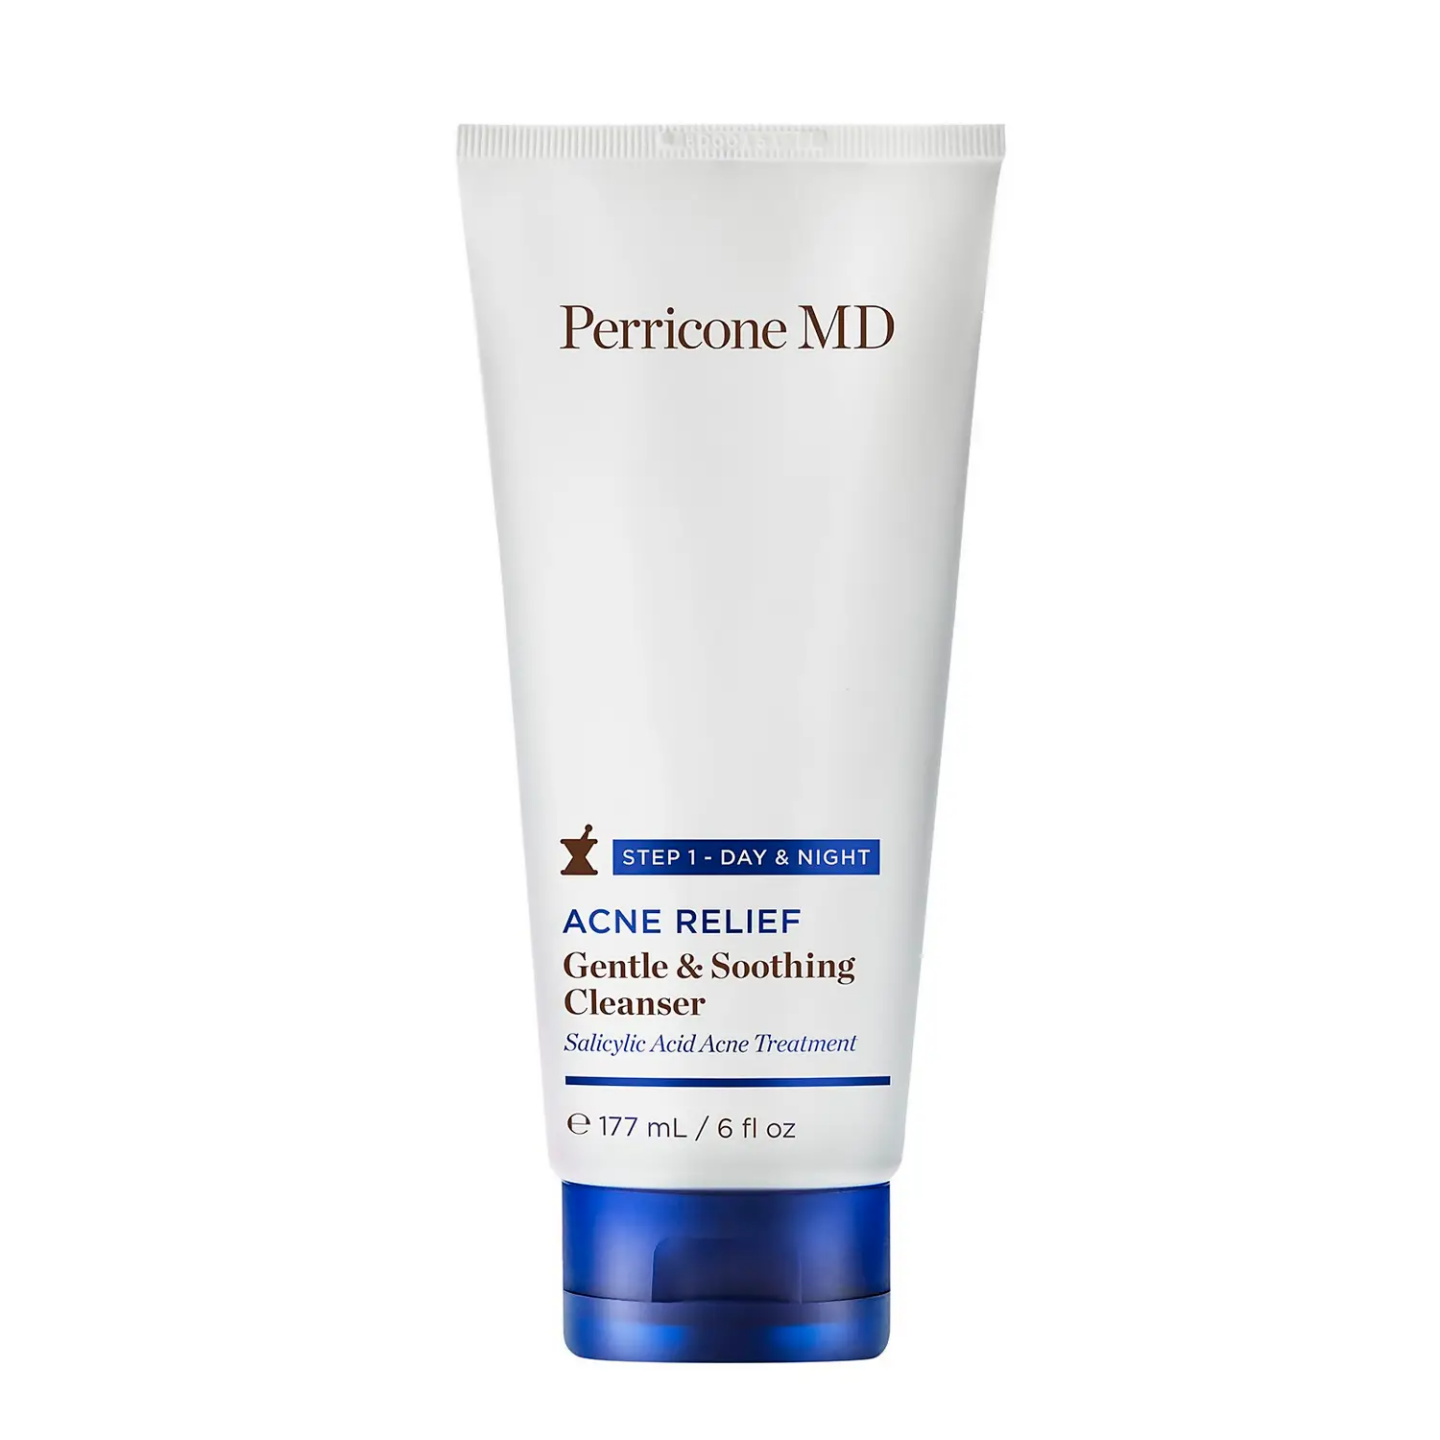 Best Acne Face Washes - Perricone